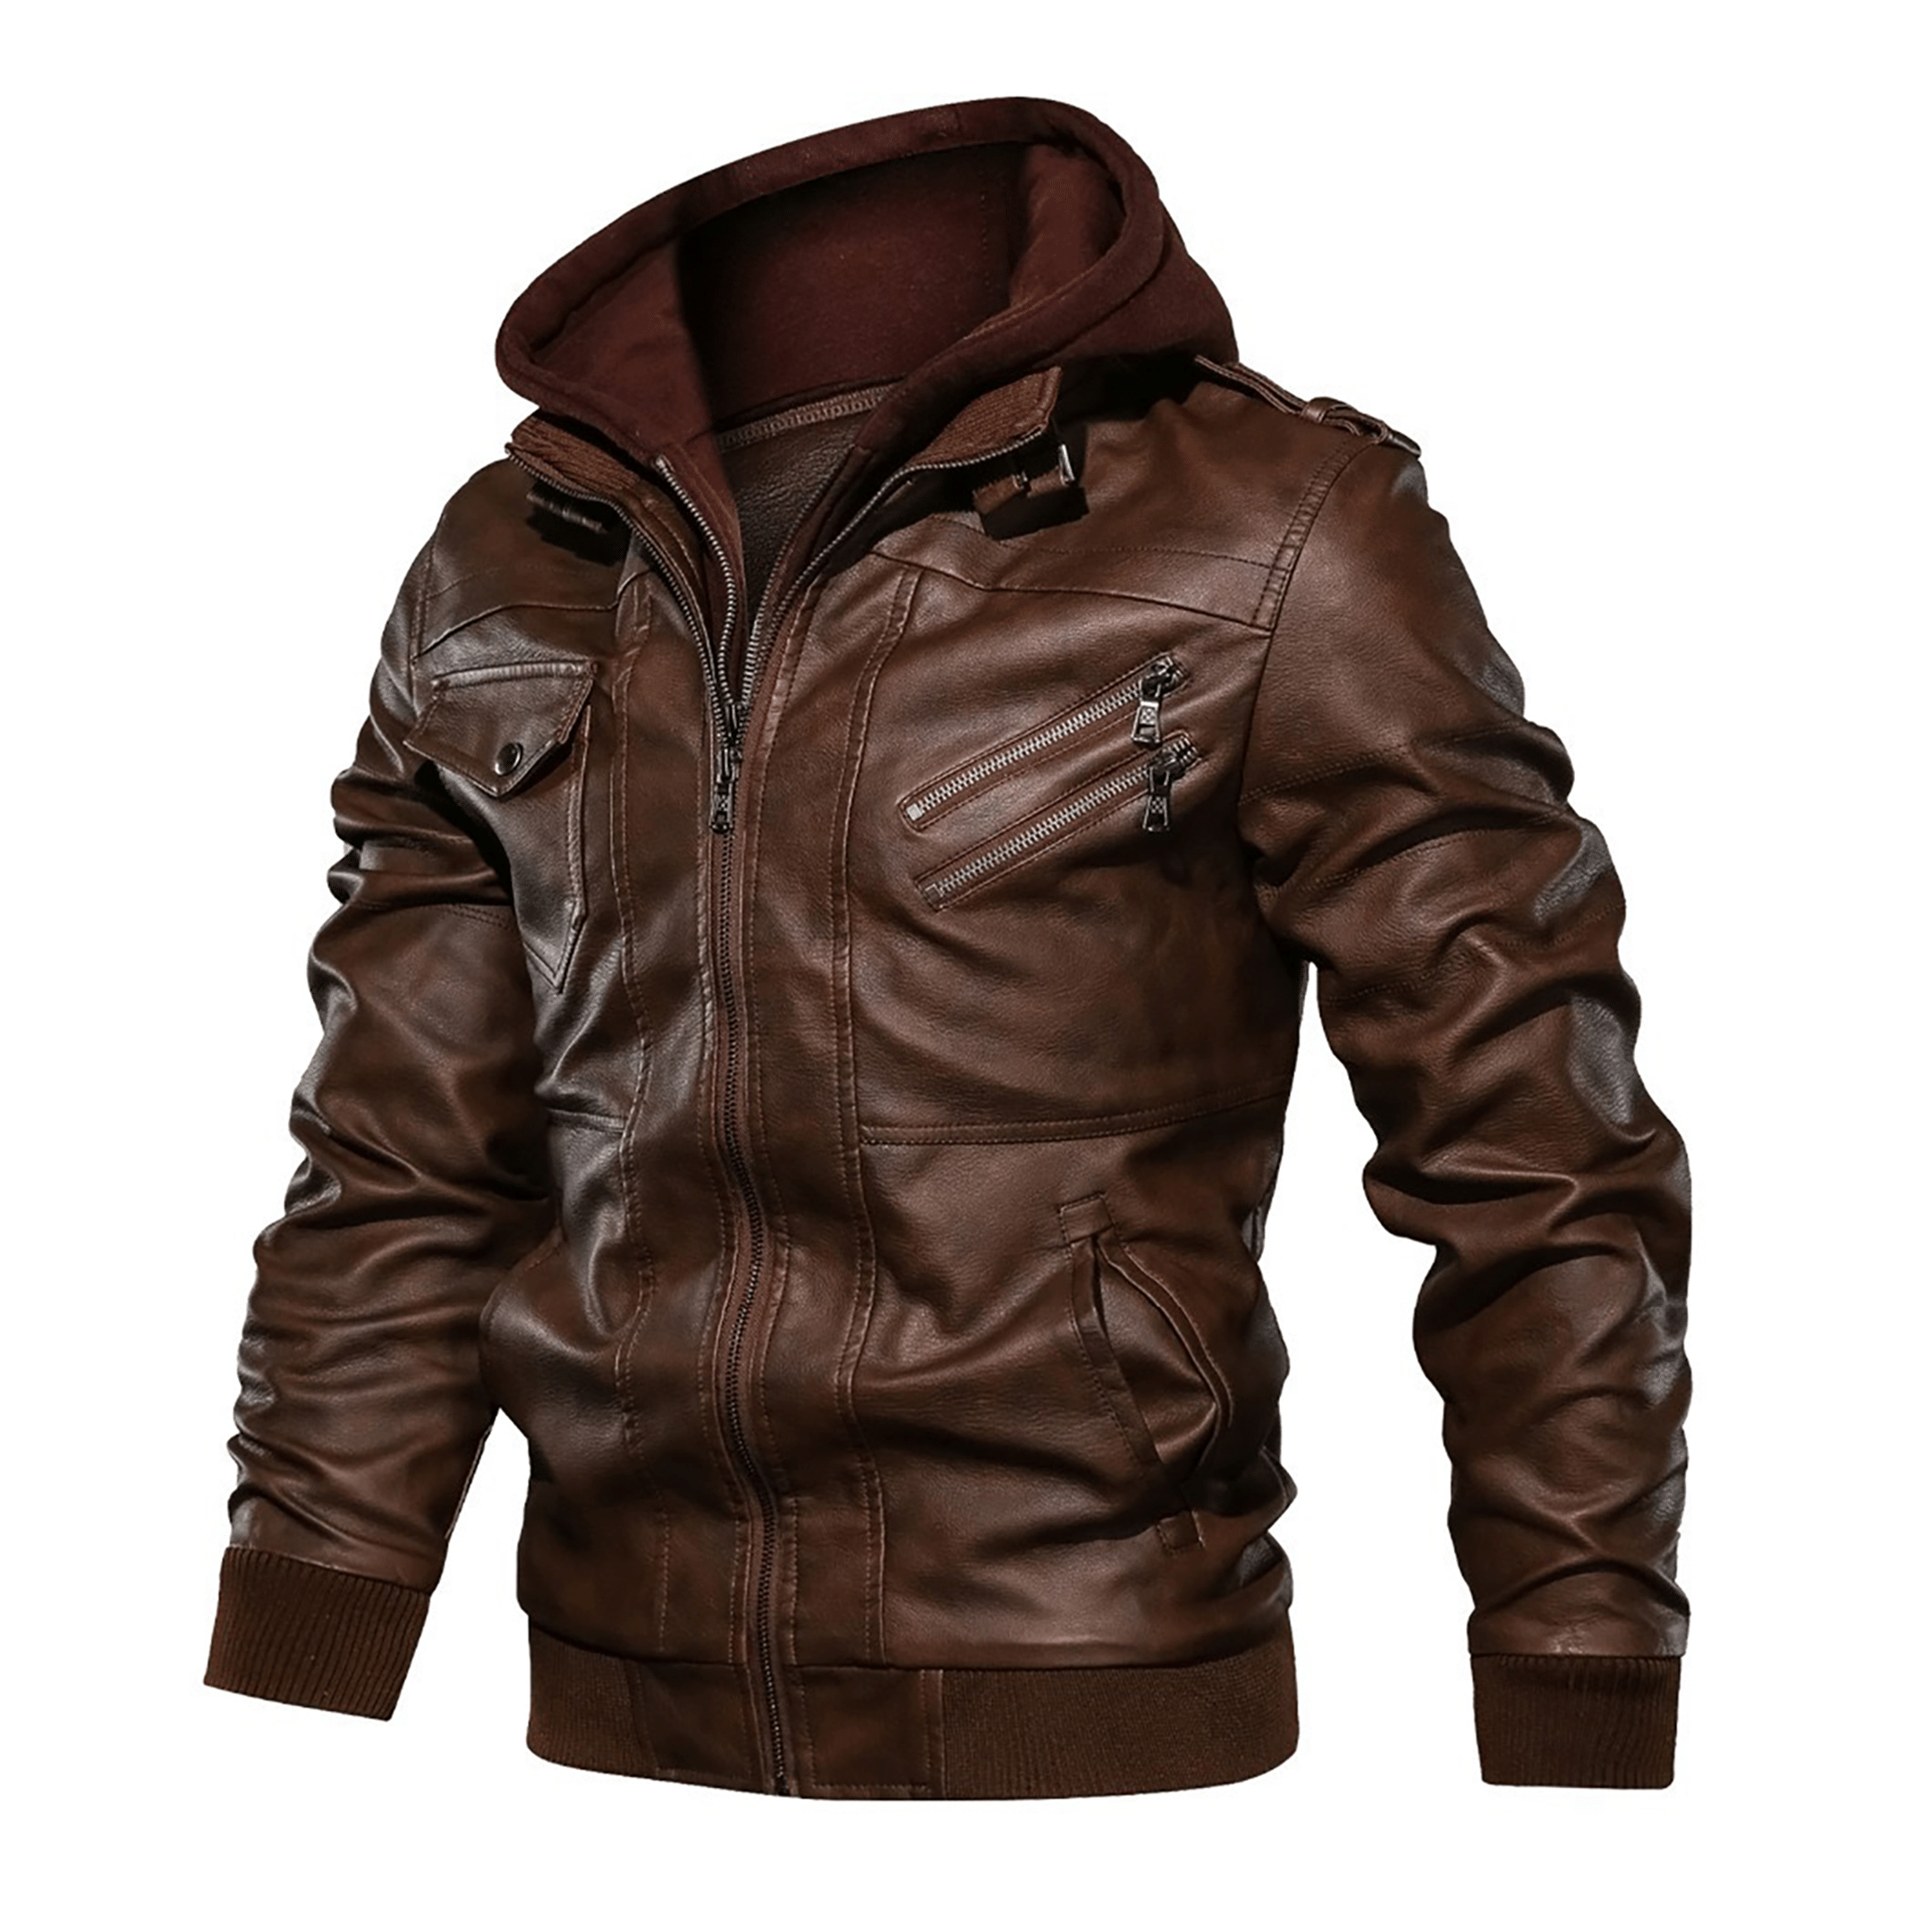 Top leather jackets and latest products 395